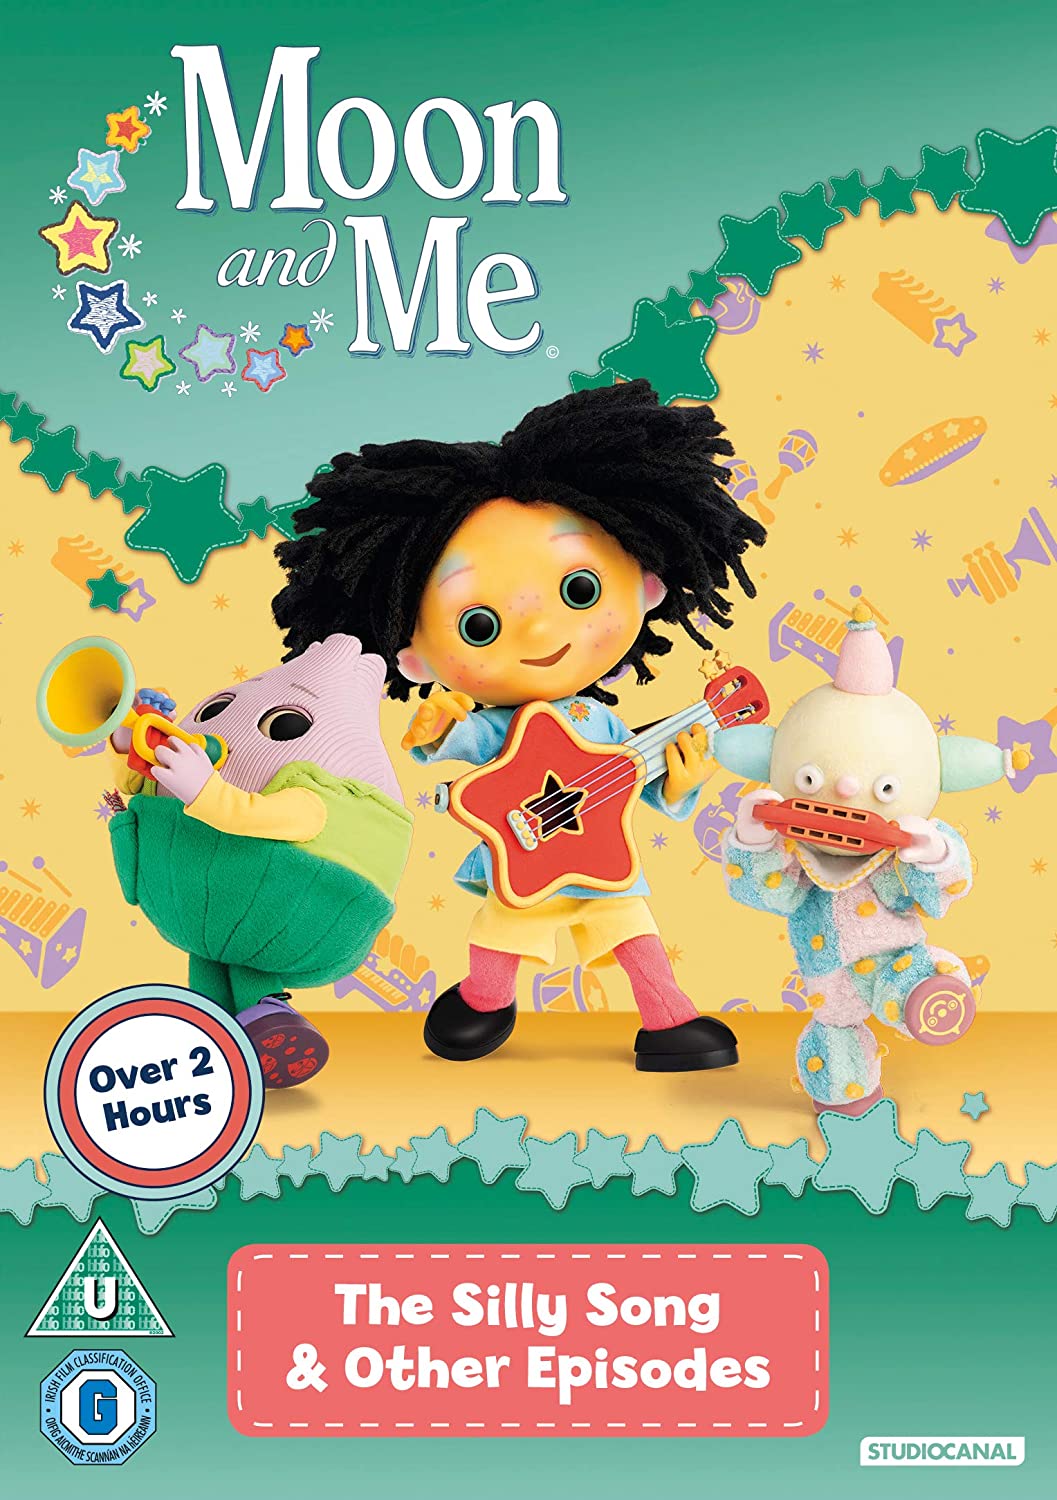 Moon And Me - The Silly Song and Other Episodes - Family/Animation [DVD]